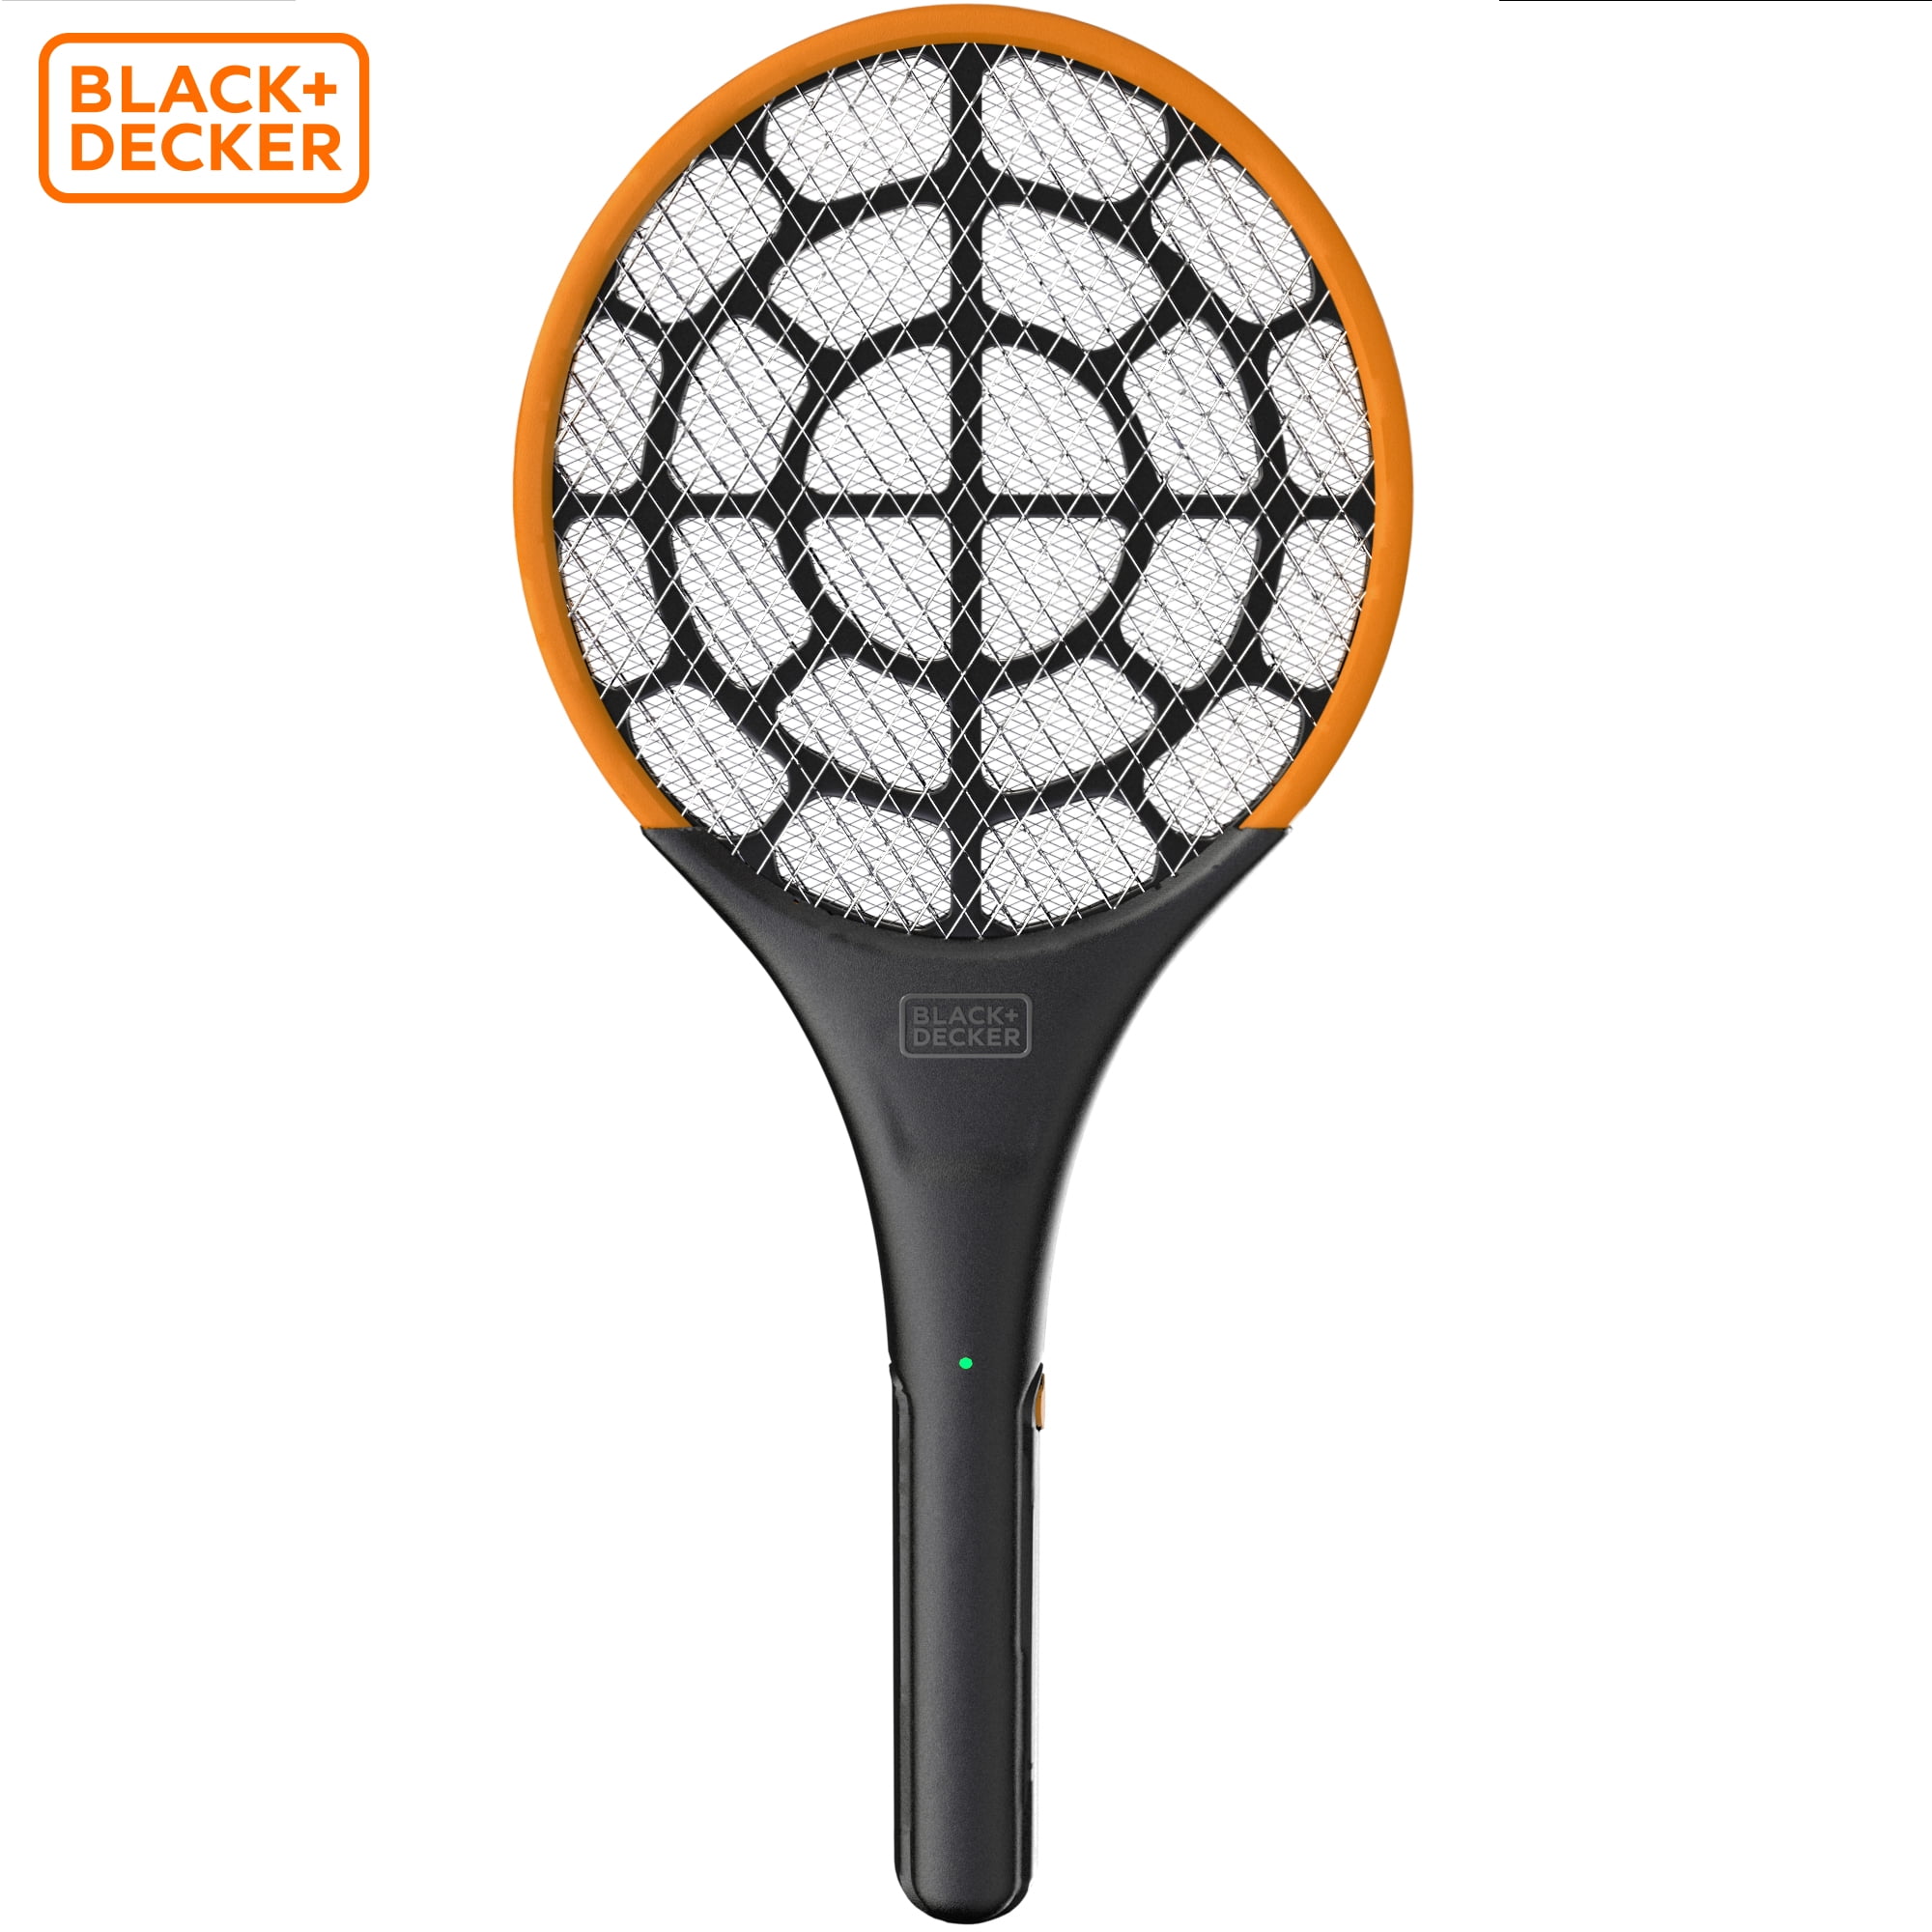  BLACK+DECKER Bug Zapper Fly Swatter Electric - Fly Zapper & Bug  Zapper Indoor & Outdoor- Heavy Duty w/Counter for Flies, Mosquitoes, Gnats  & Other Small to Large Flying Pests 